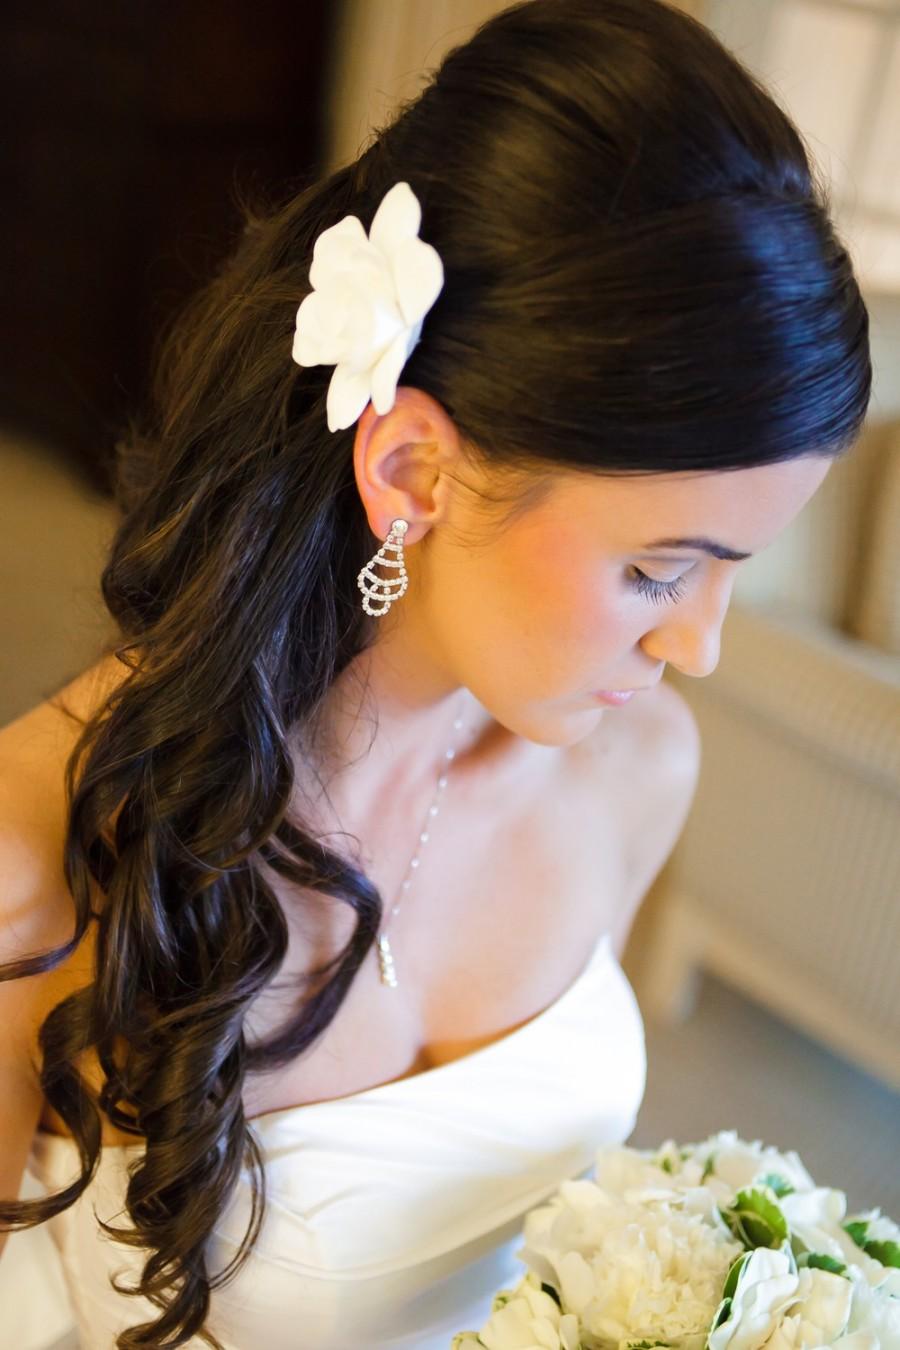 Hochzeit - Ready to Ship - The Original Gardenia Hair Flower for Weddings as seen in Southern Weddings  Magazine in Antique White with Alligator Clip